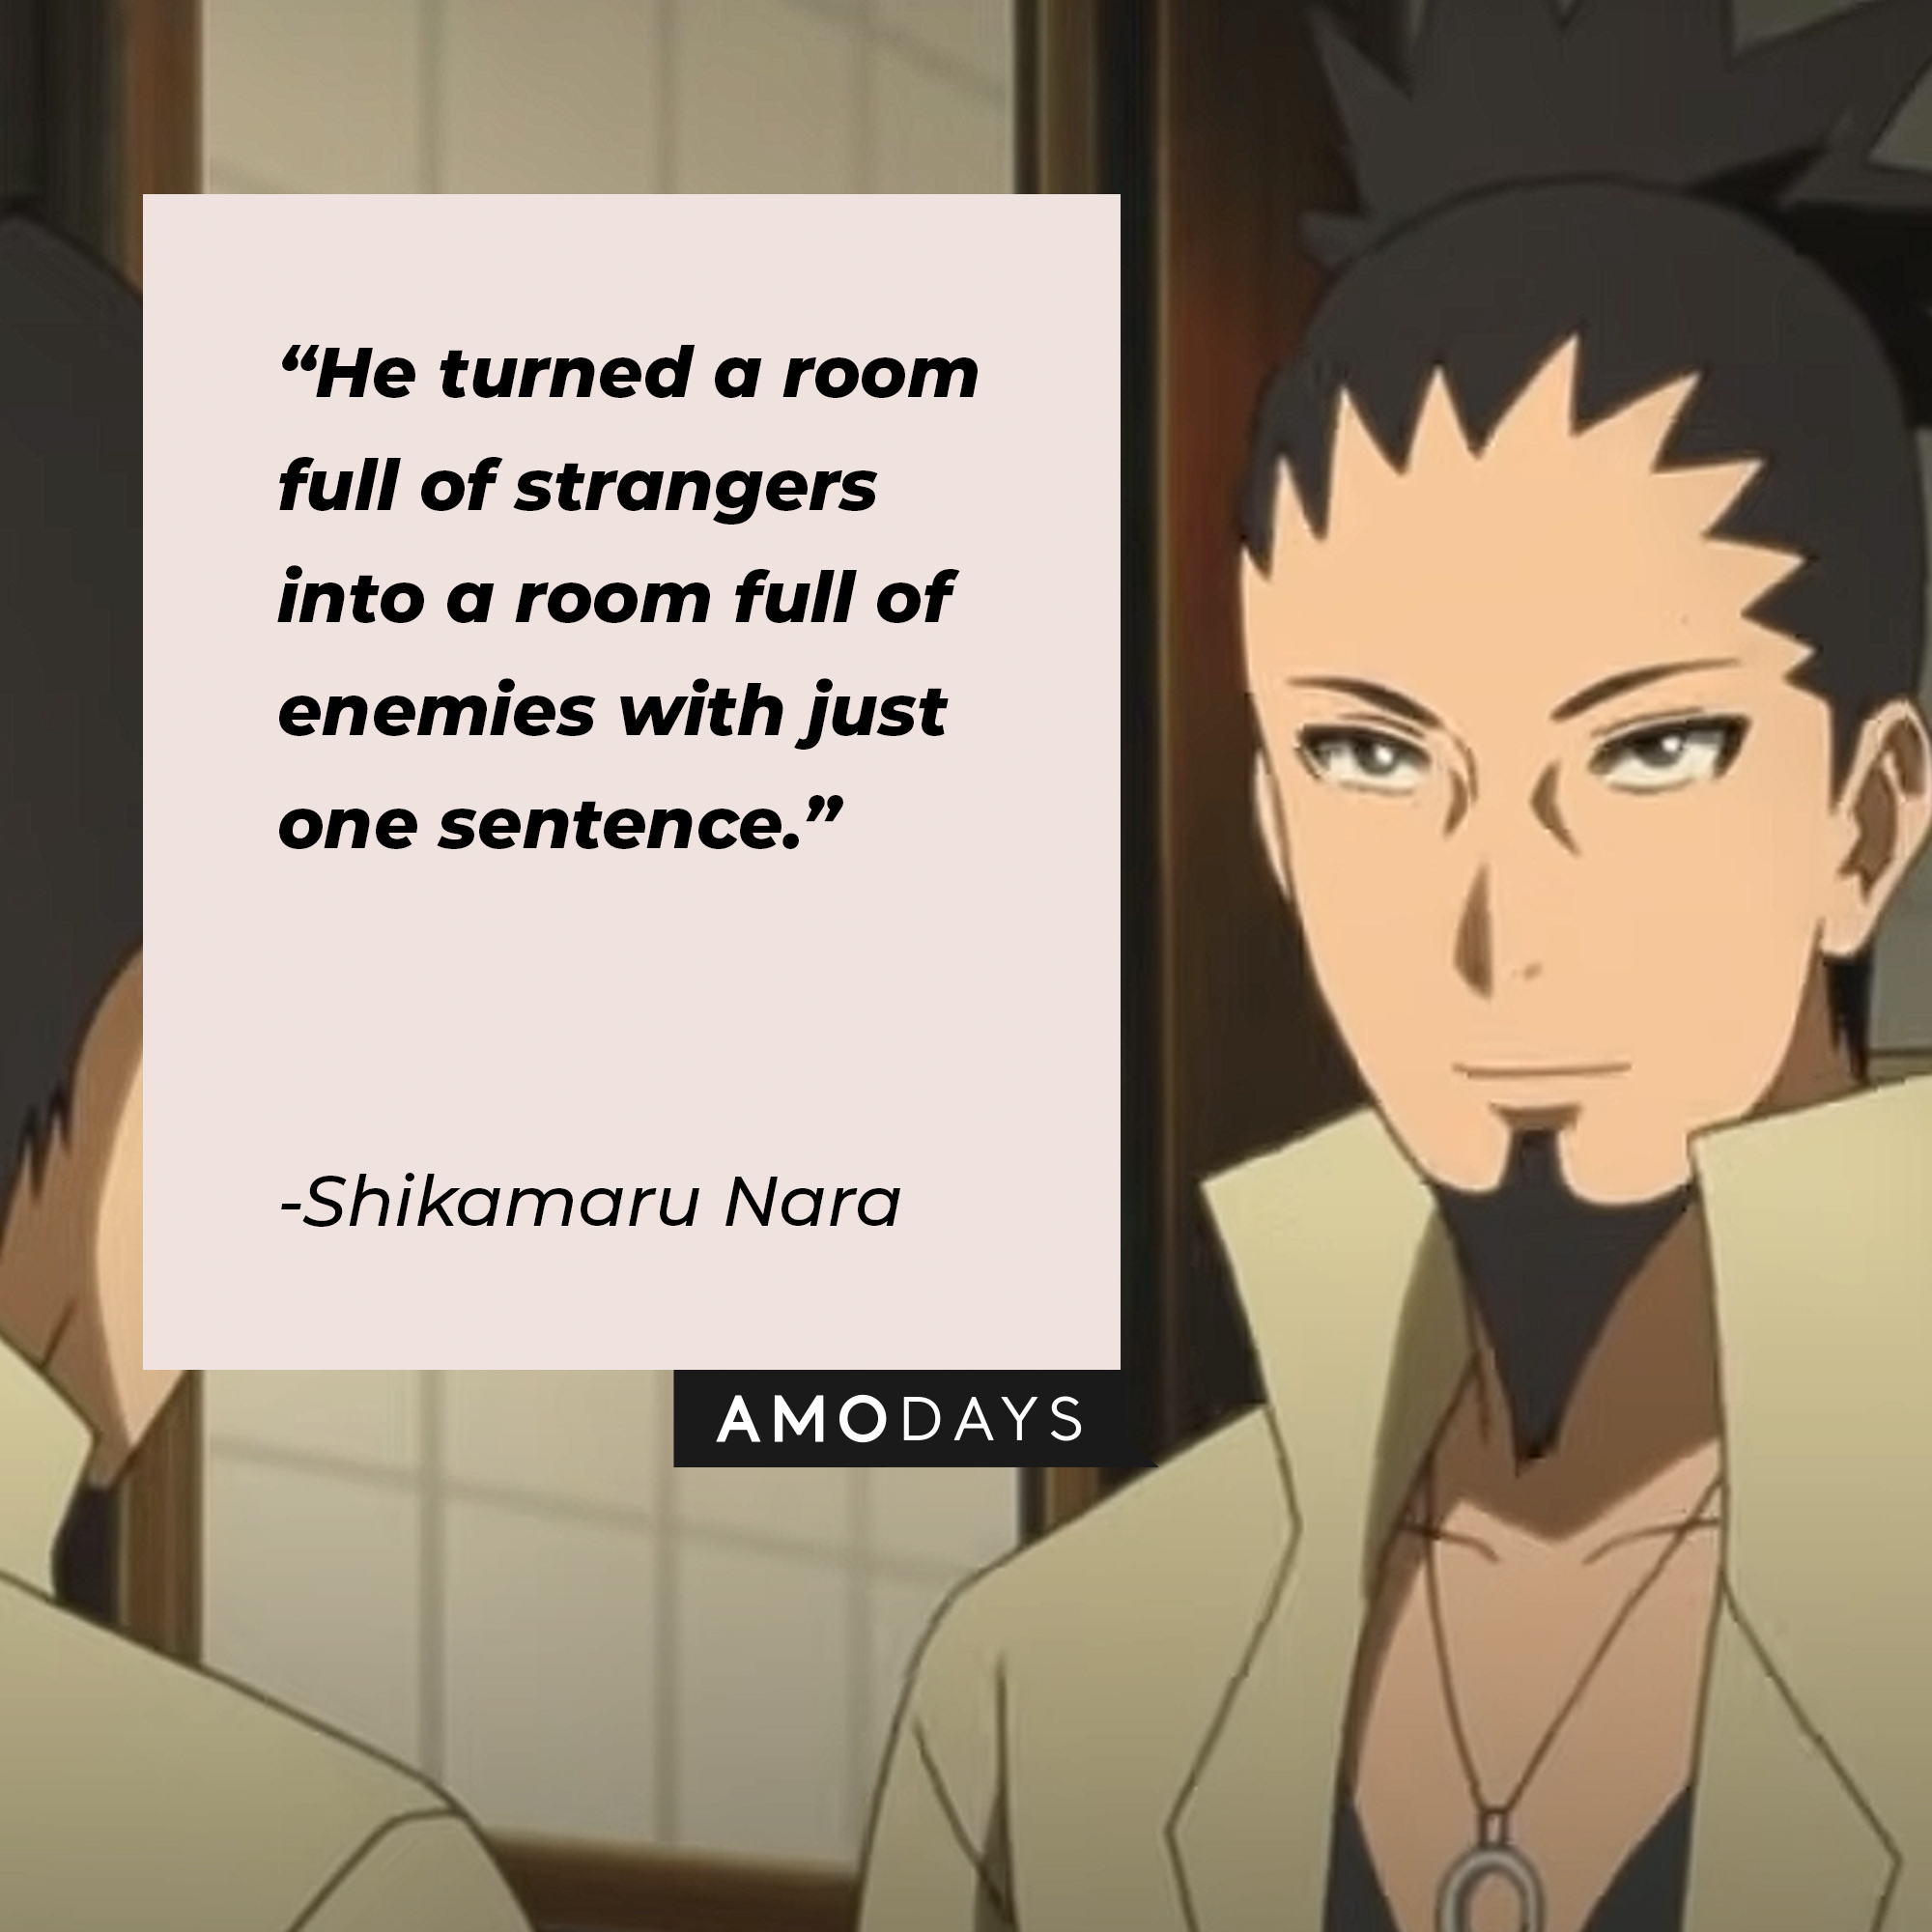 A picture of  Shikamaru Nara with the quote: "He turned a room full of strangers into a room full of enemies with just one sentence.” | Source:youtube.com/CrunchyrollCollection